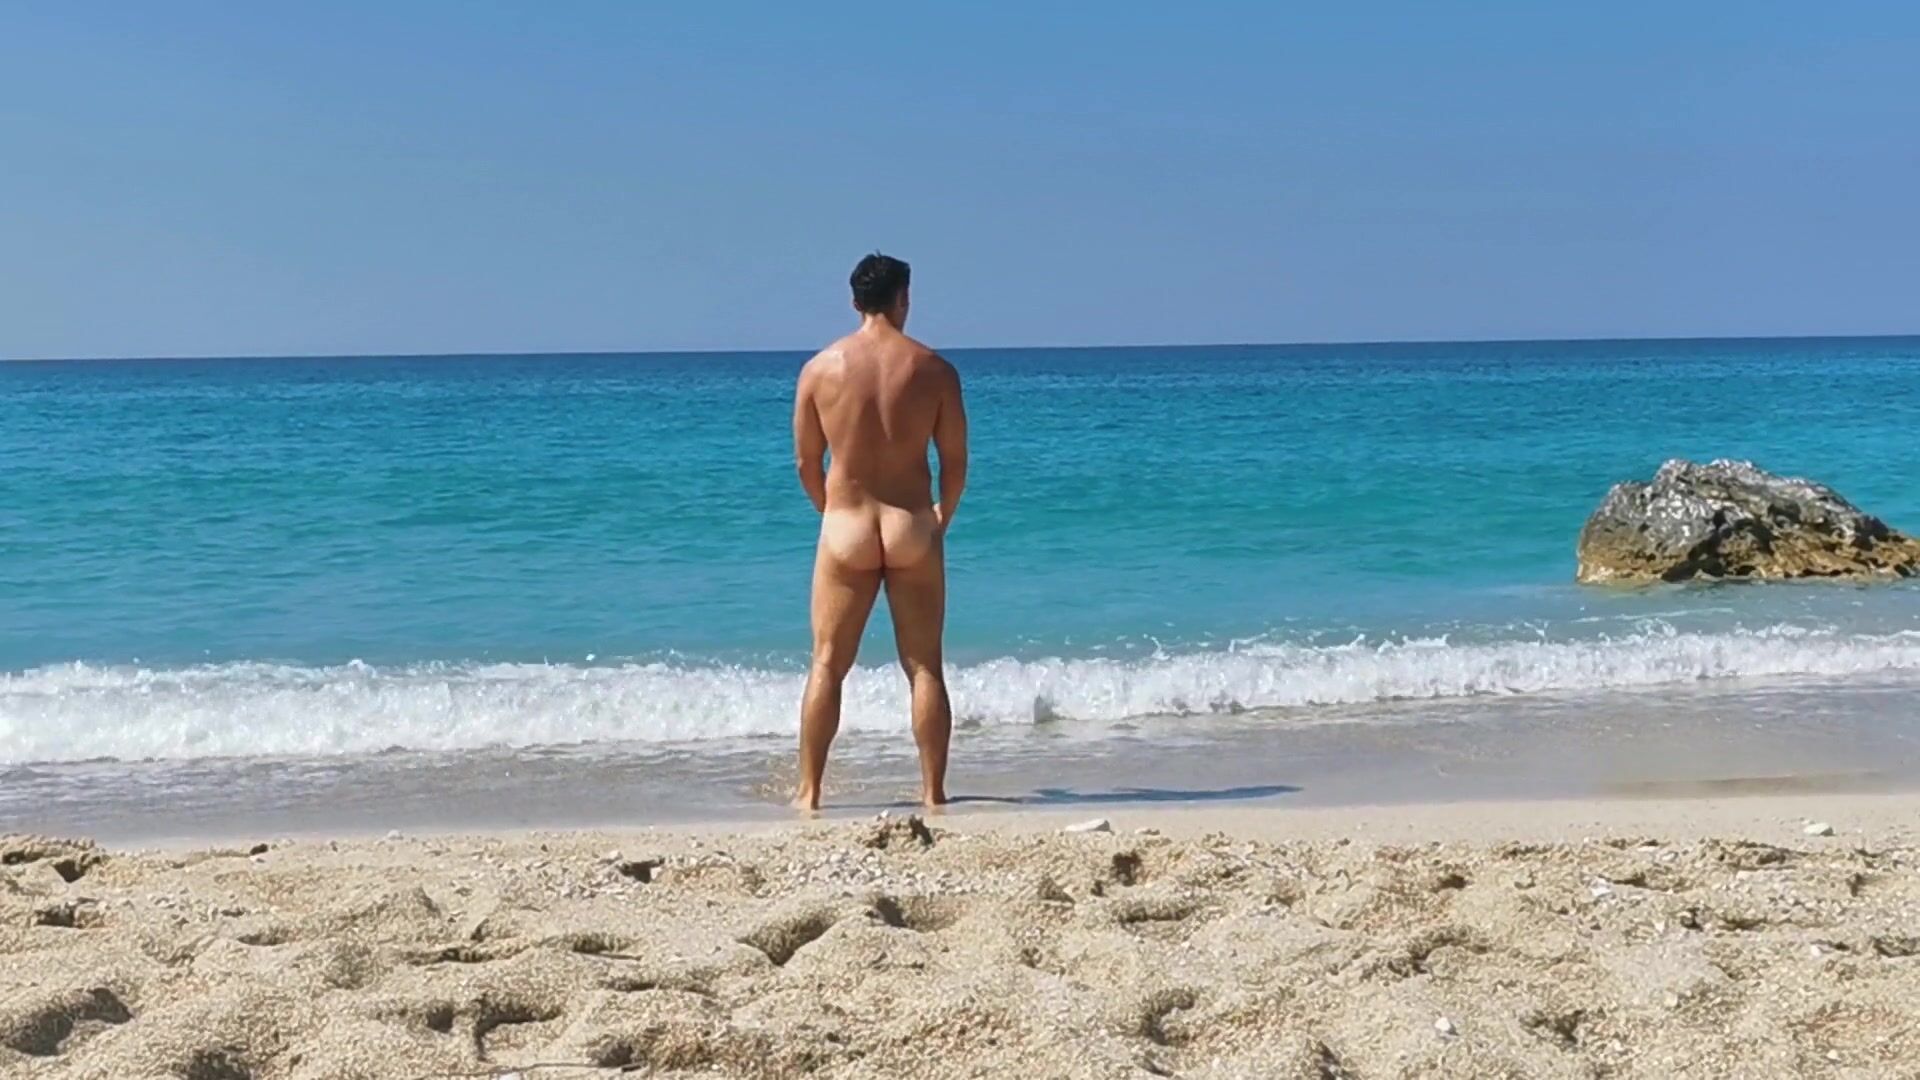 People record videos of me at the nude beach and then they give them to me...I don;t get it.